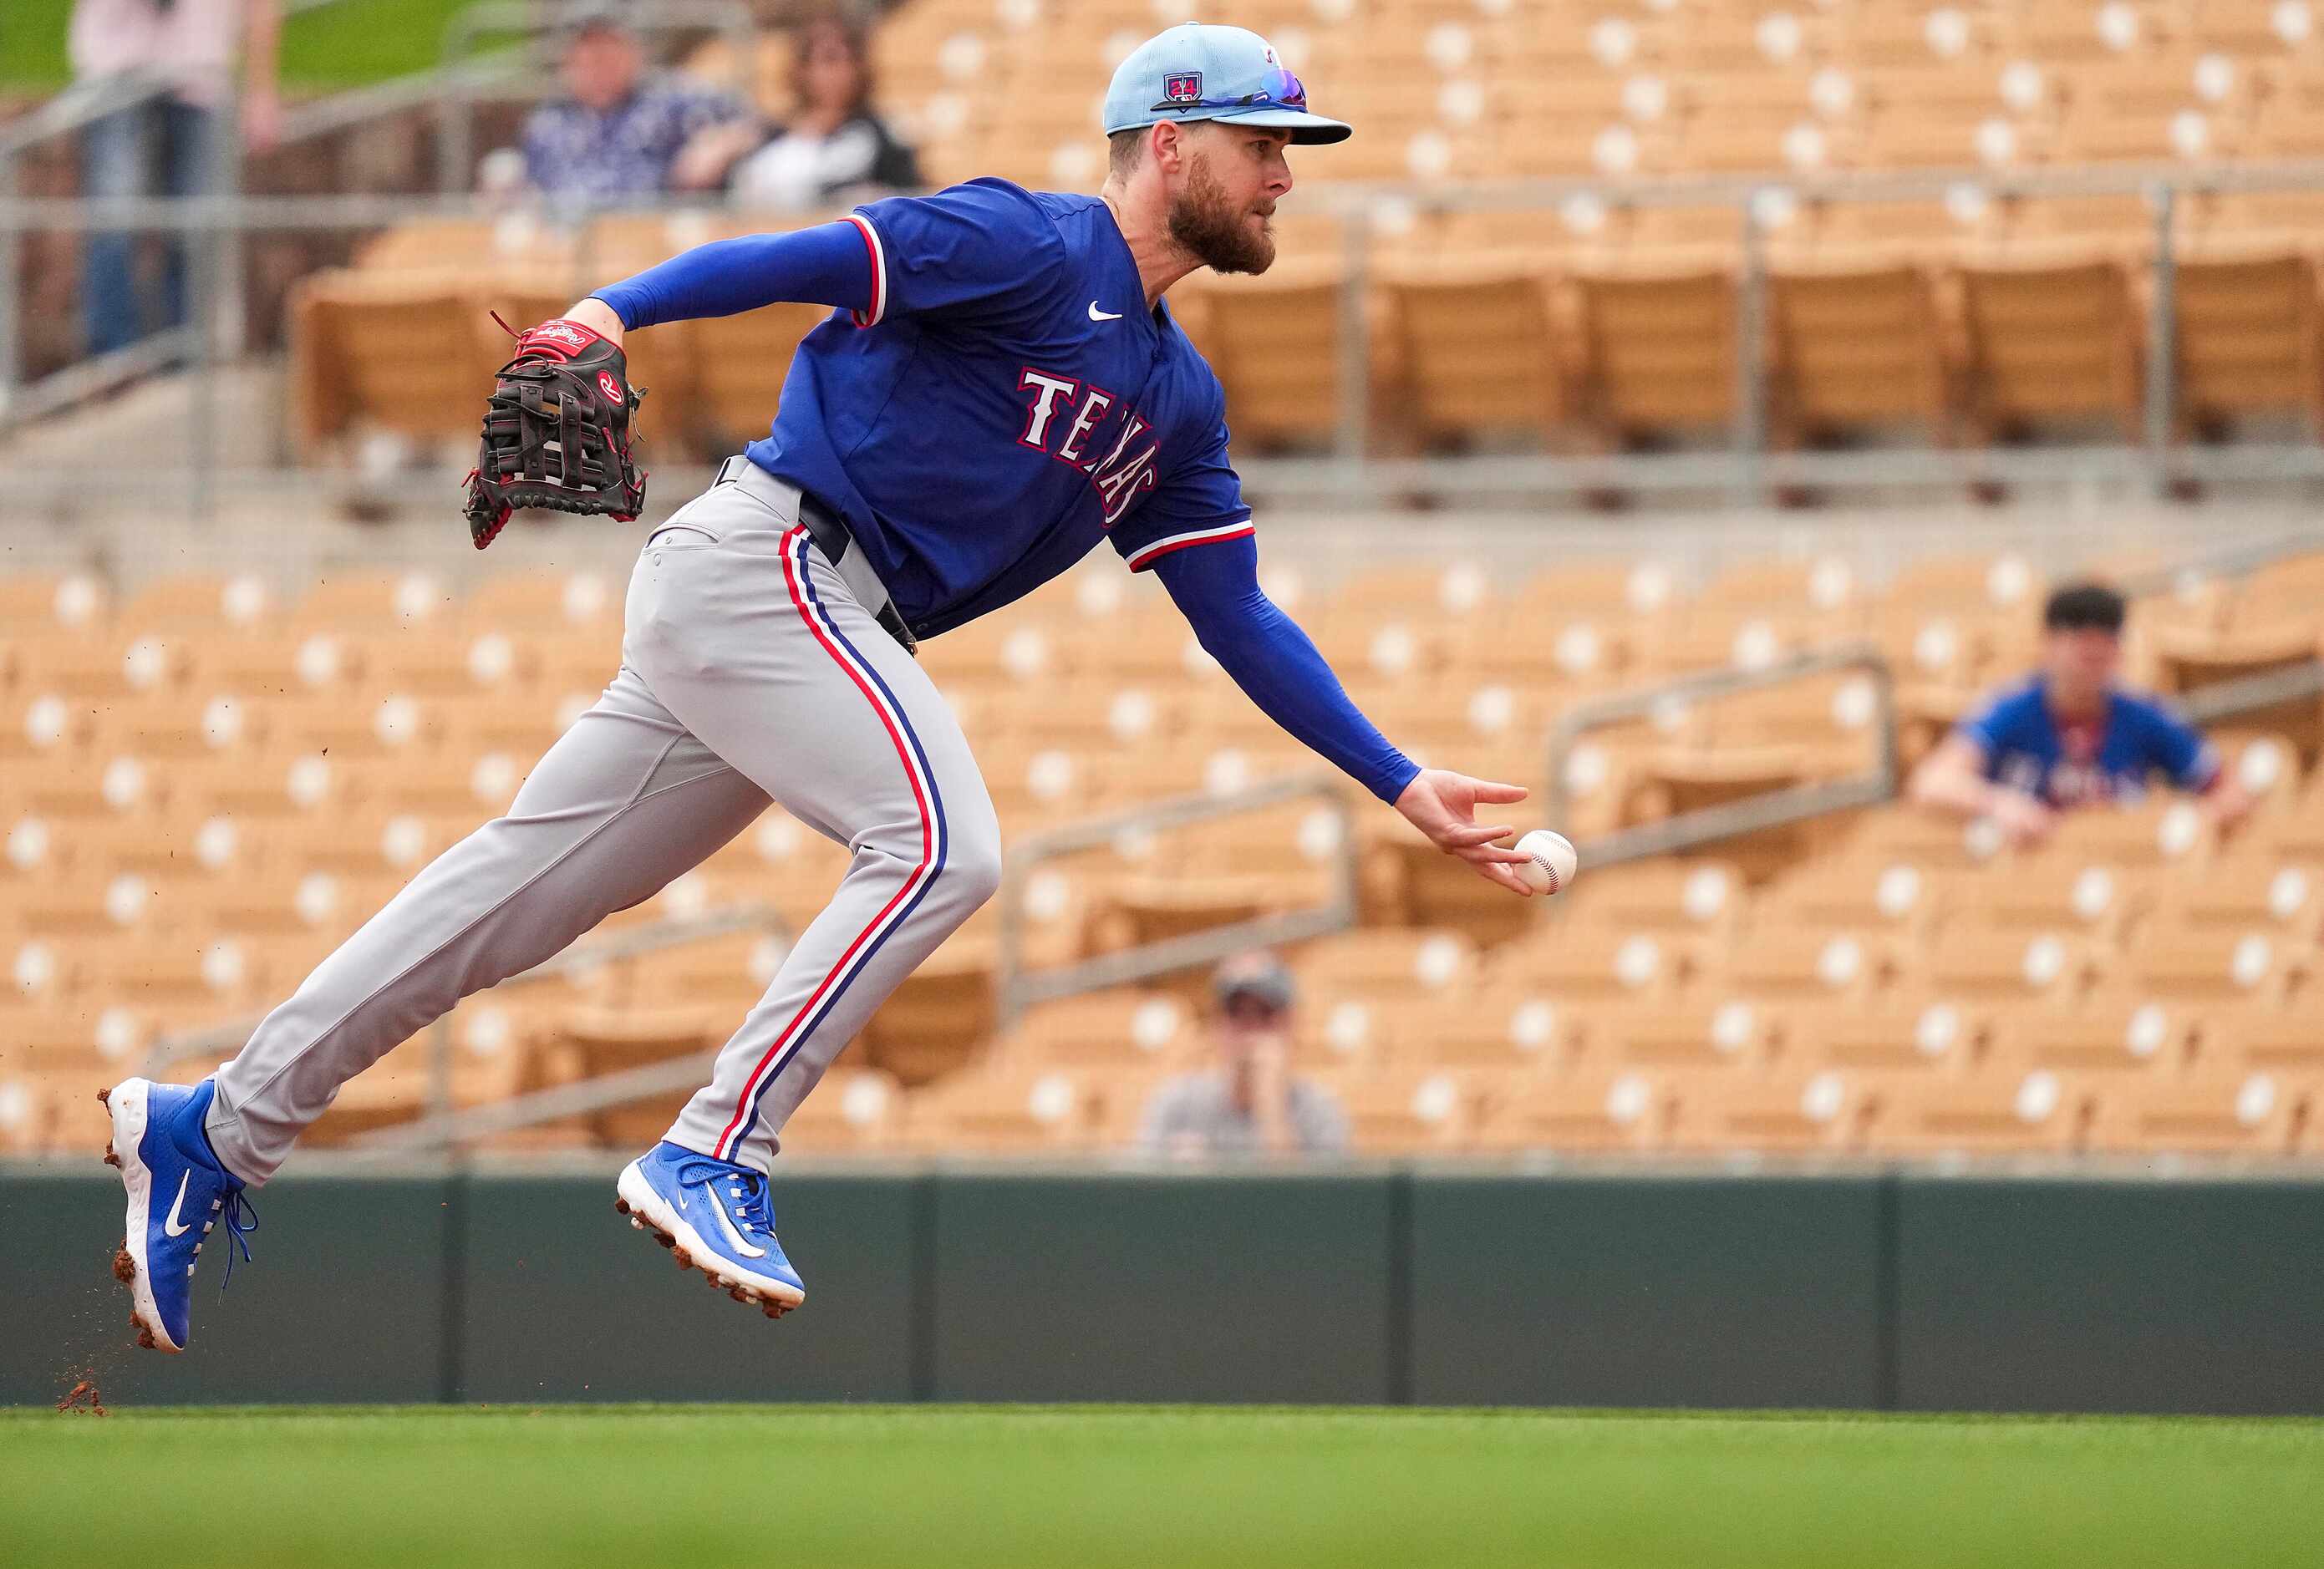 Texas Rangers infielder Jared Walsh flips to the pitcher covering first base to retire...